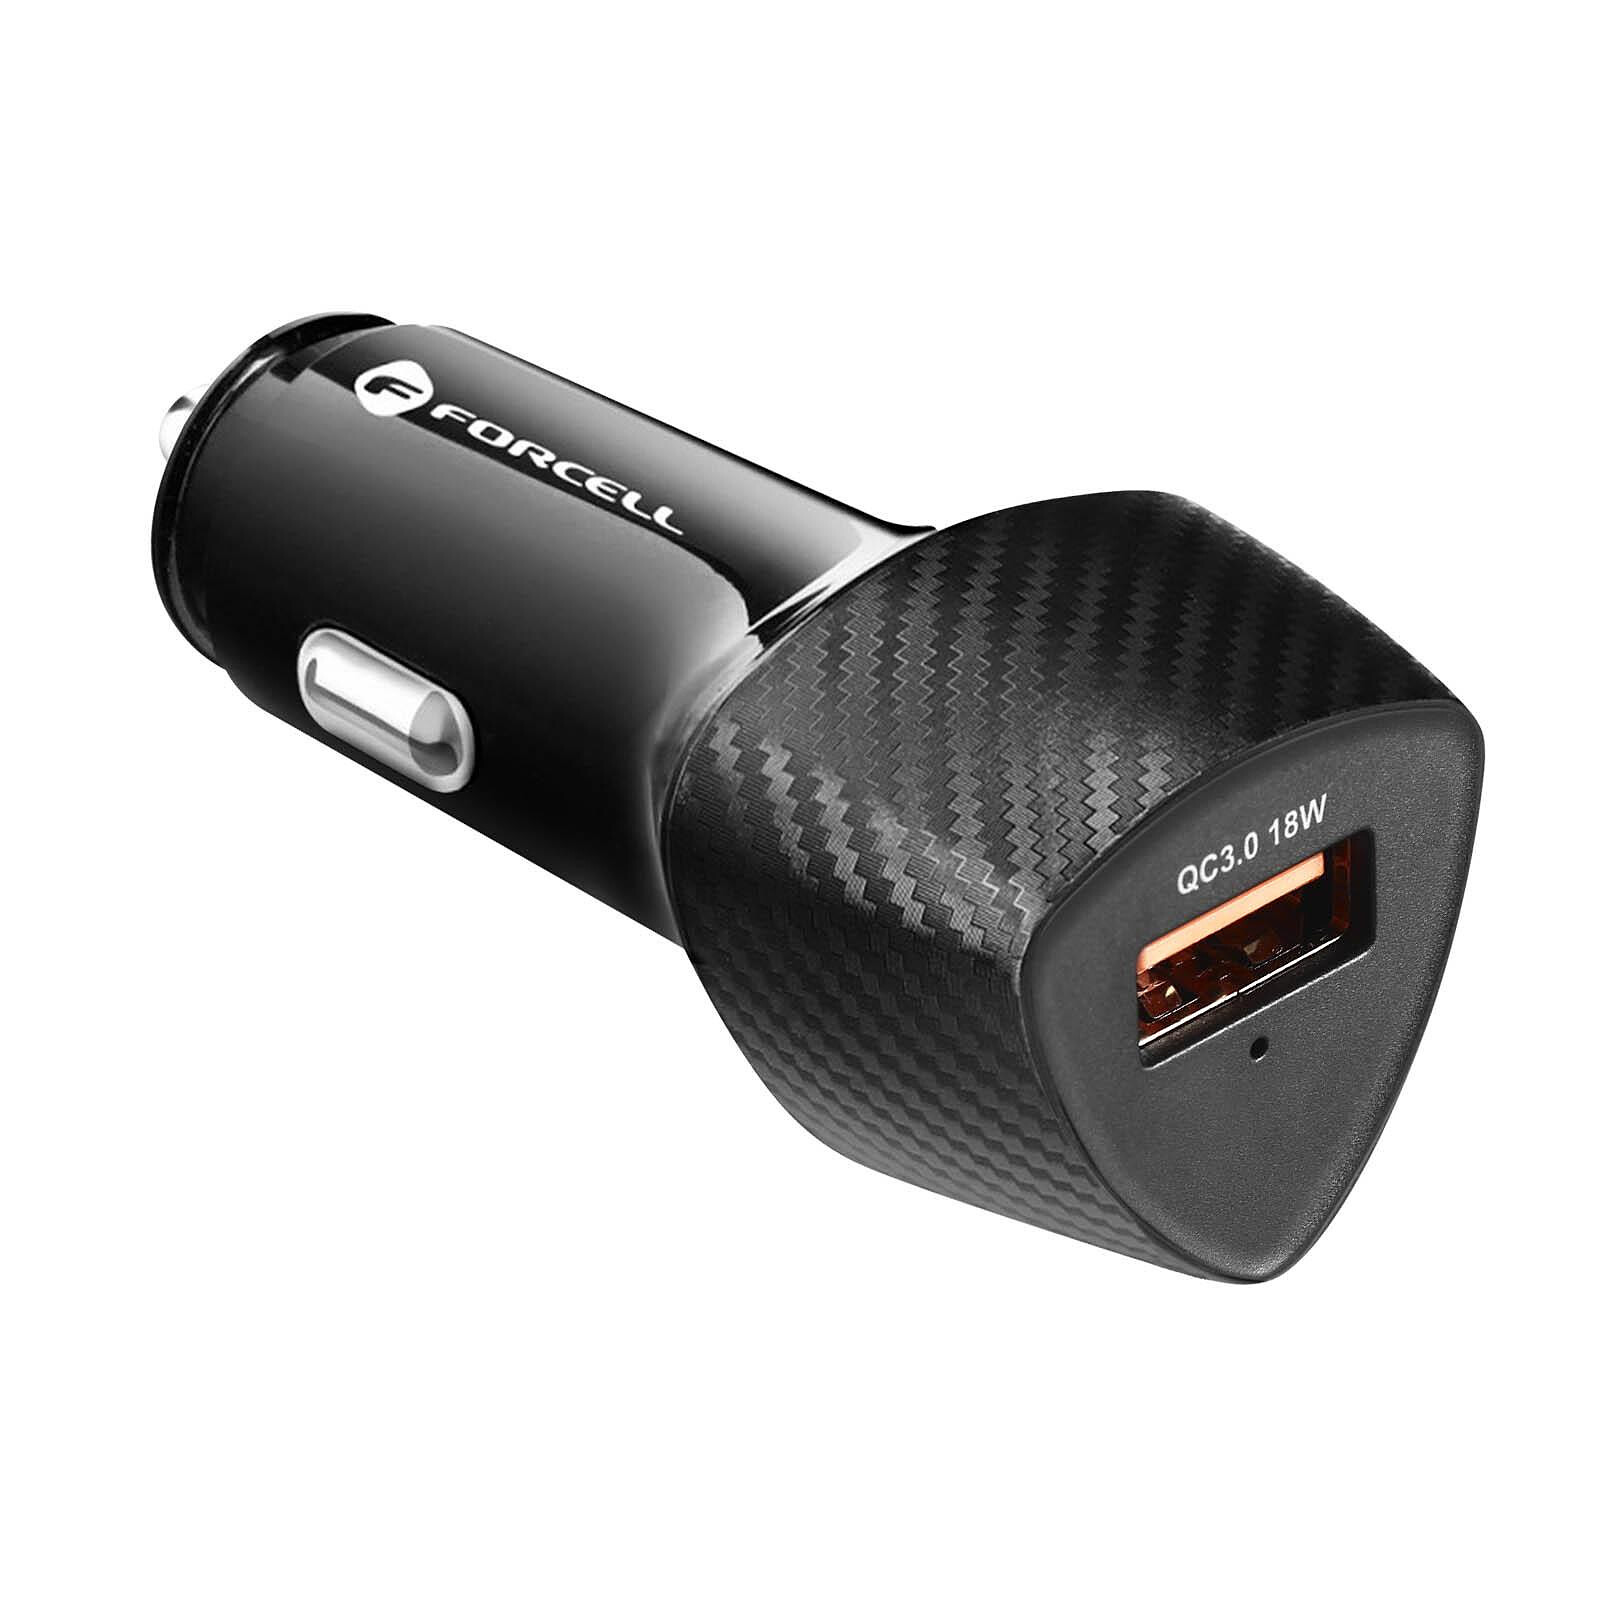 Chargeur allume cigare rapide double USB 3.0 universel Chargeur voiture